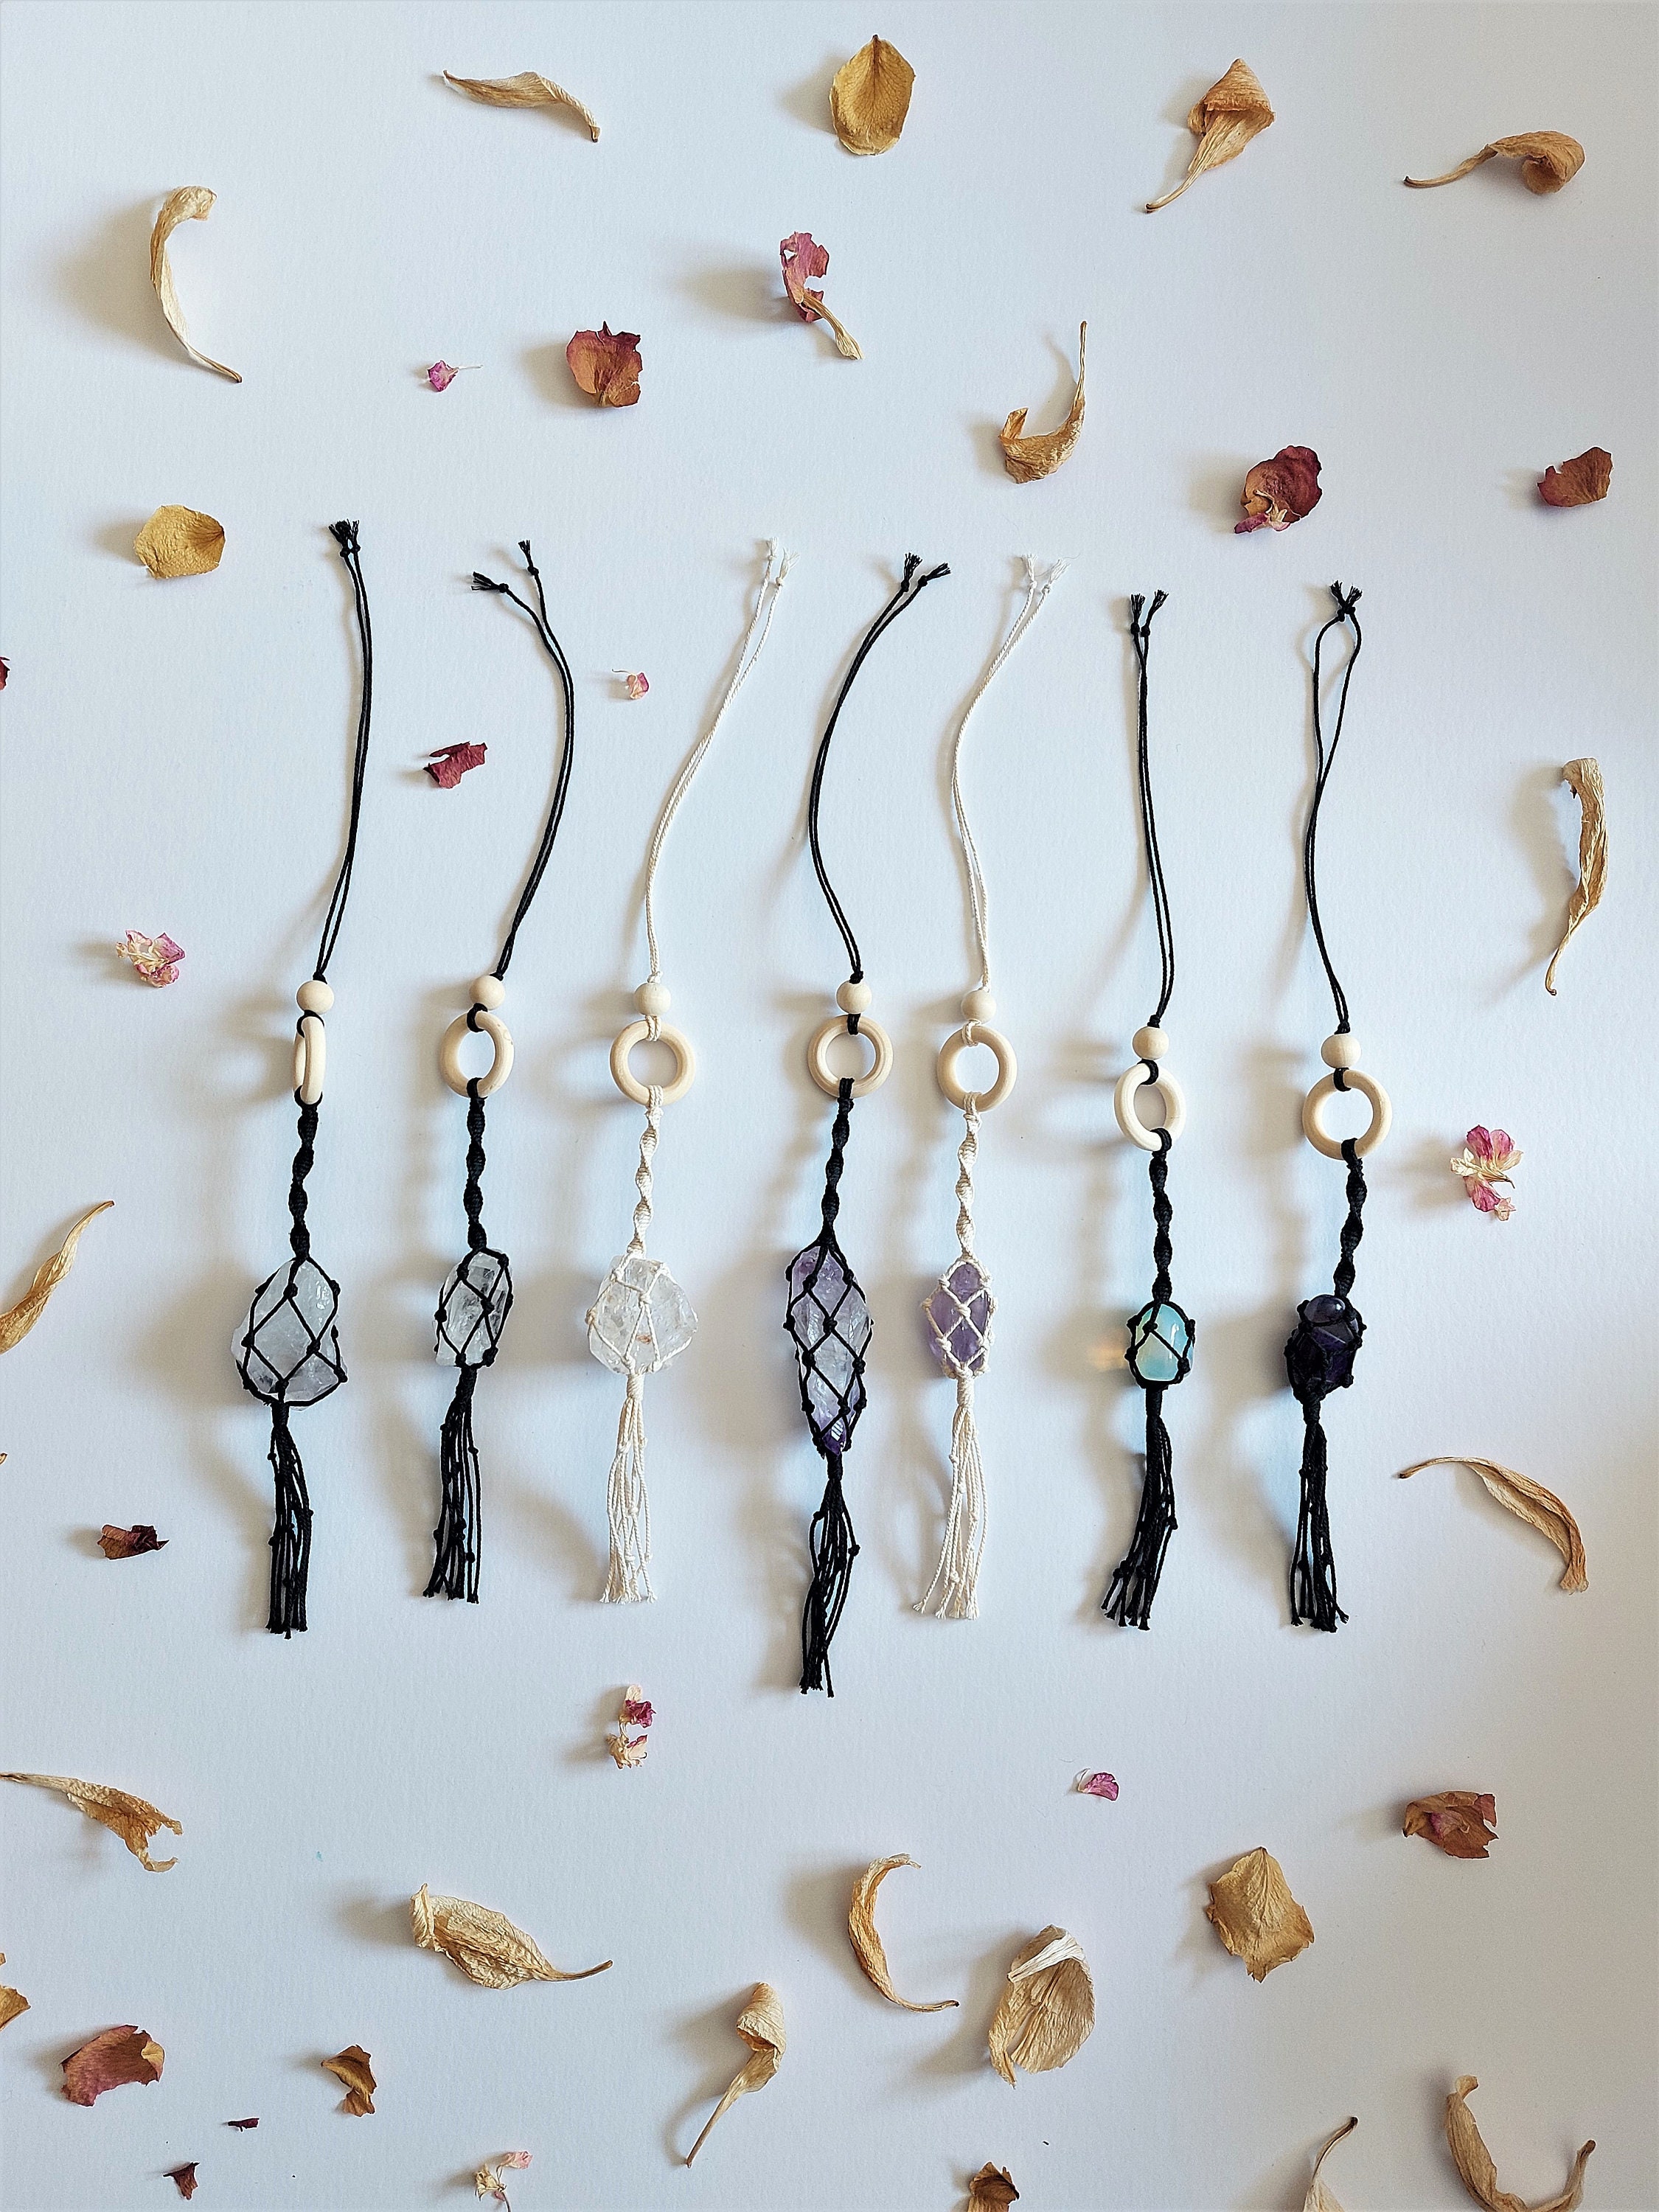 Intuition Connection Love Rearview Mirror Decorations –Healing Healing Crystal Accessories BOHO GARDEN Hanging Car Charm – Clear Quartz & Rose Quartz Dangling Moon Clarity Energy Self-Worth 